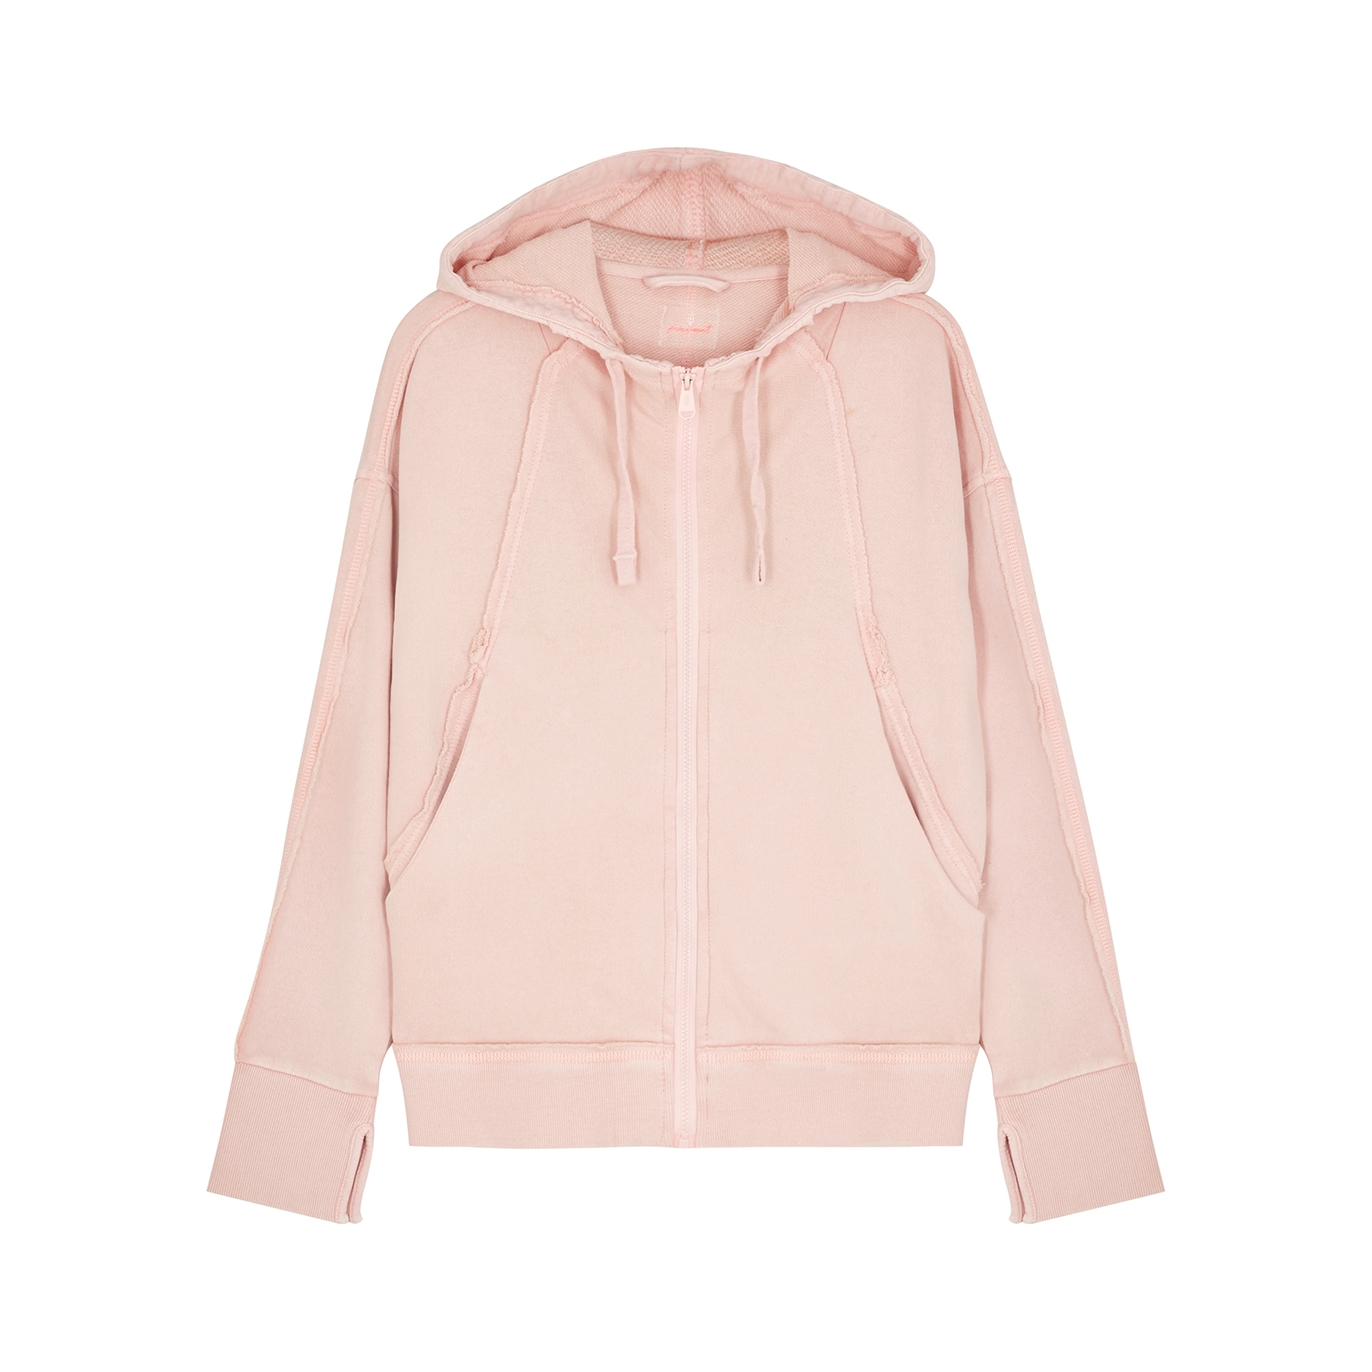 Free People Movement Only One Pink Hooded Cotton Sweatshirt - Rose - M